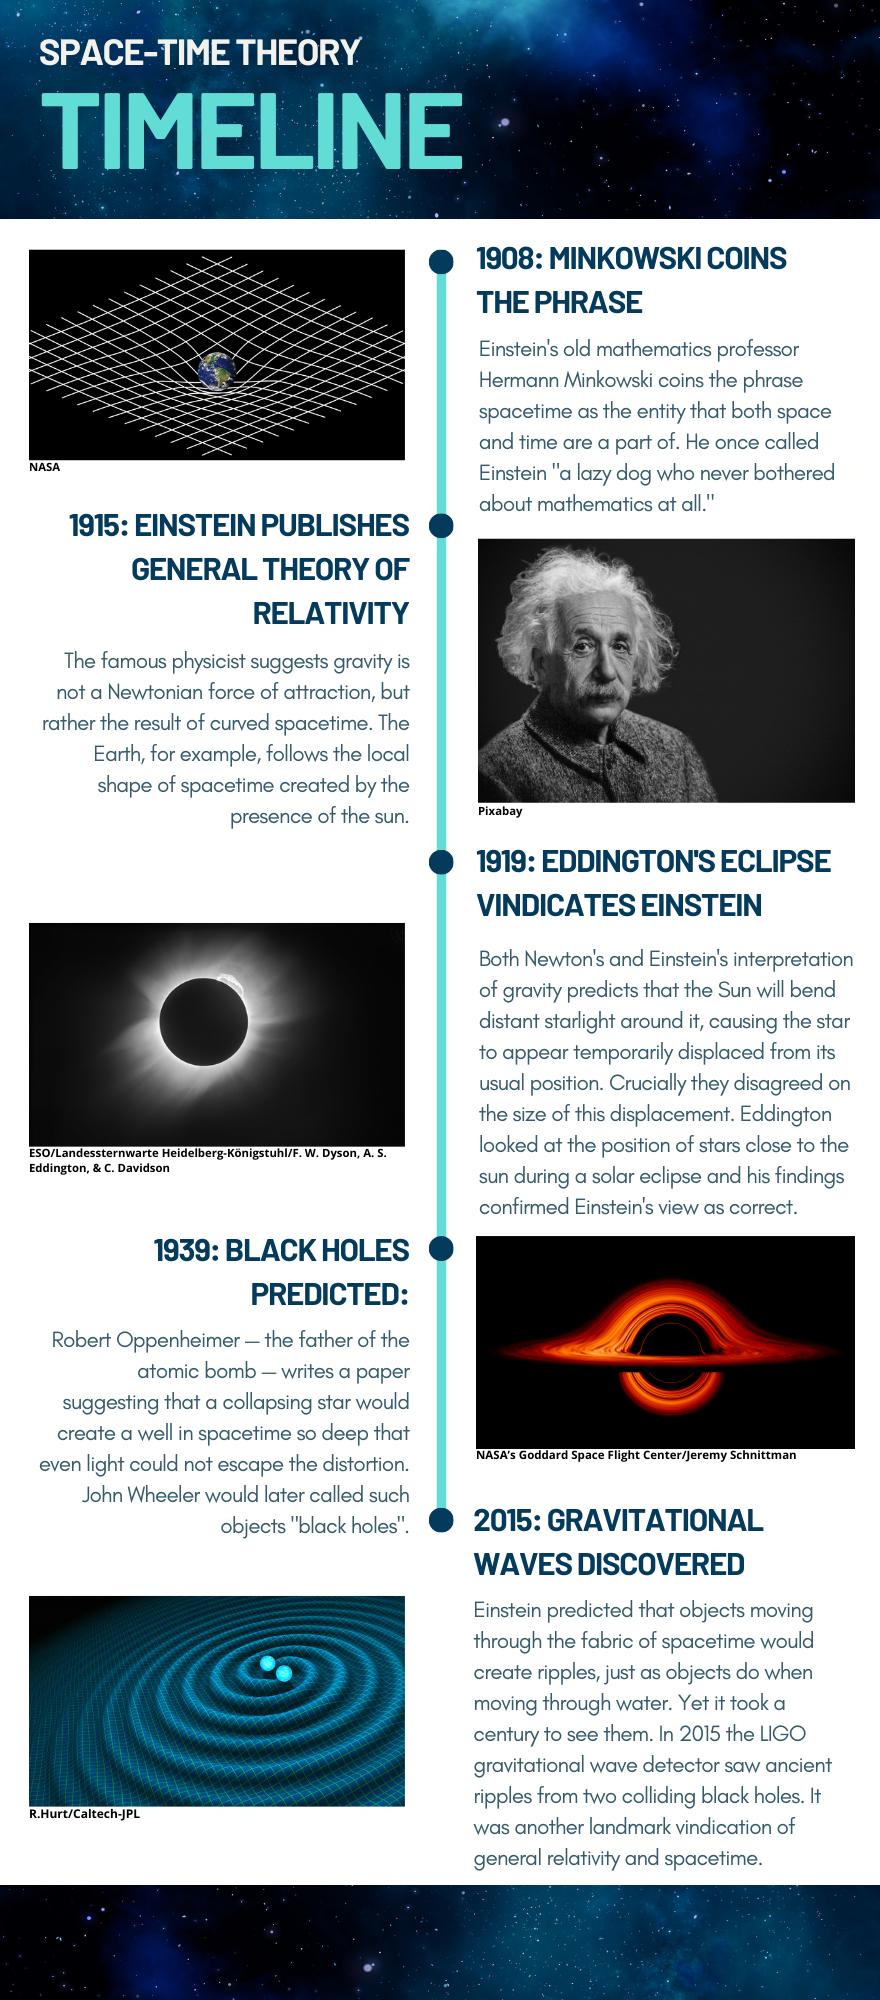 Space-time theory timeline.